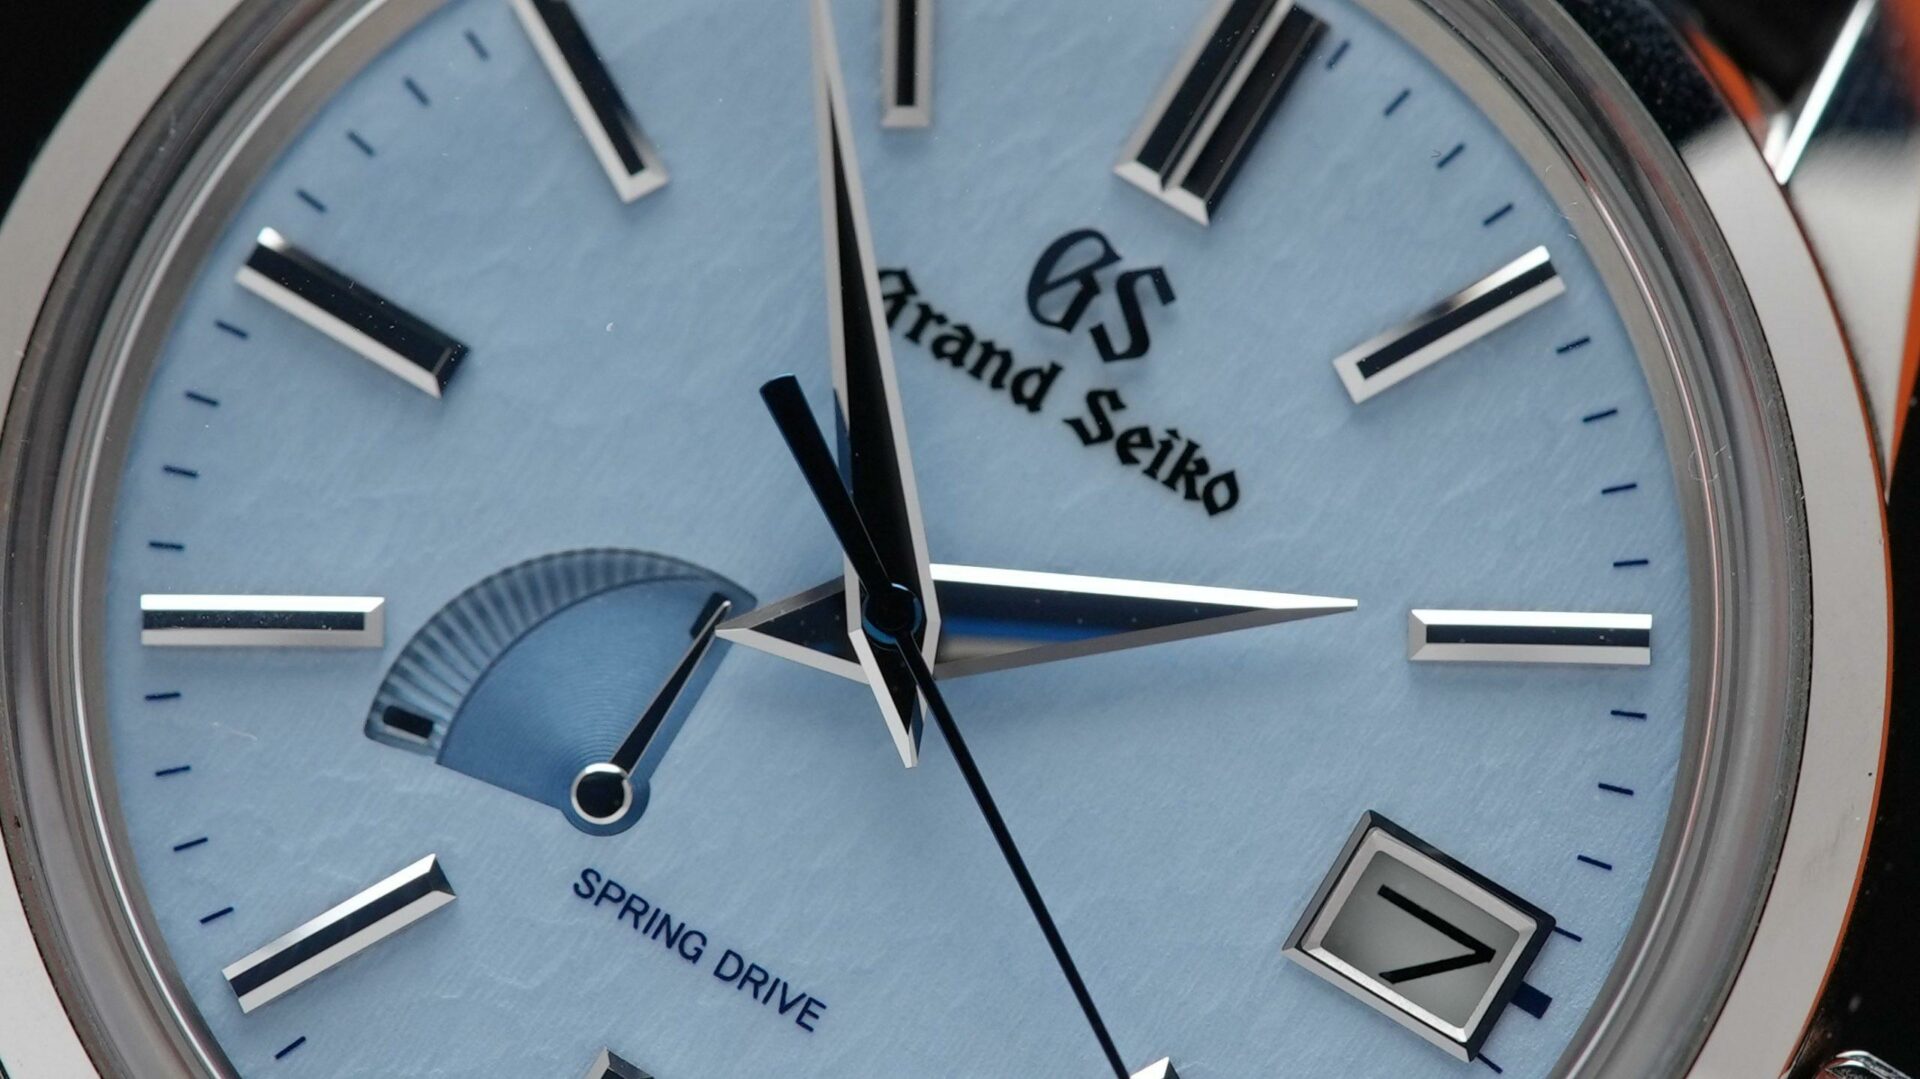 Grand Seiko SBGA407 SkyFlake on display showing the blue “Snowflake” dial zoomed in.